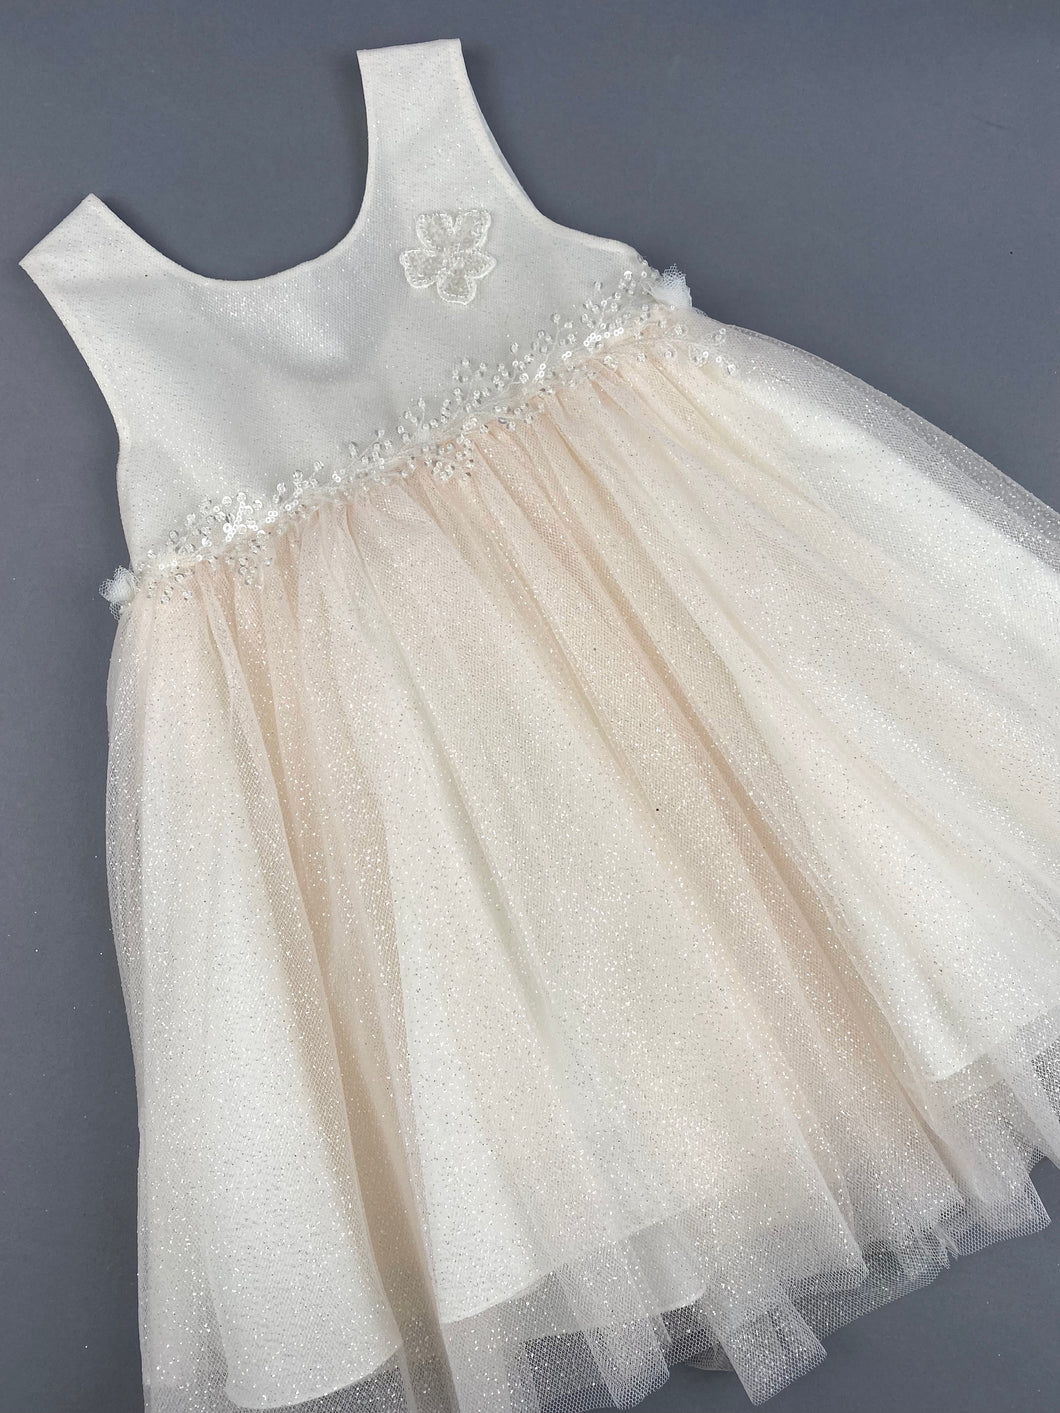 Dress 59 Girls Baptismal Christening Dress very light glitter pink, matching Bolero and Hat. Made in Greece exclusively for Rosies Collections.